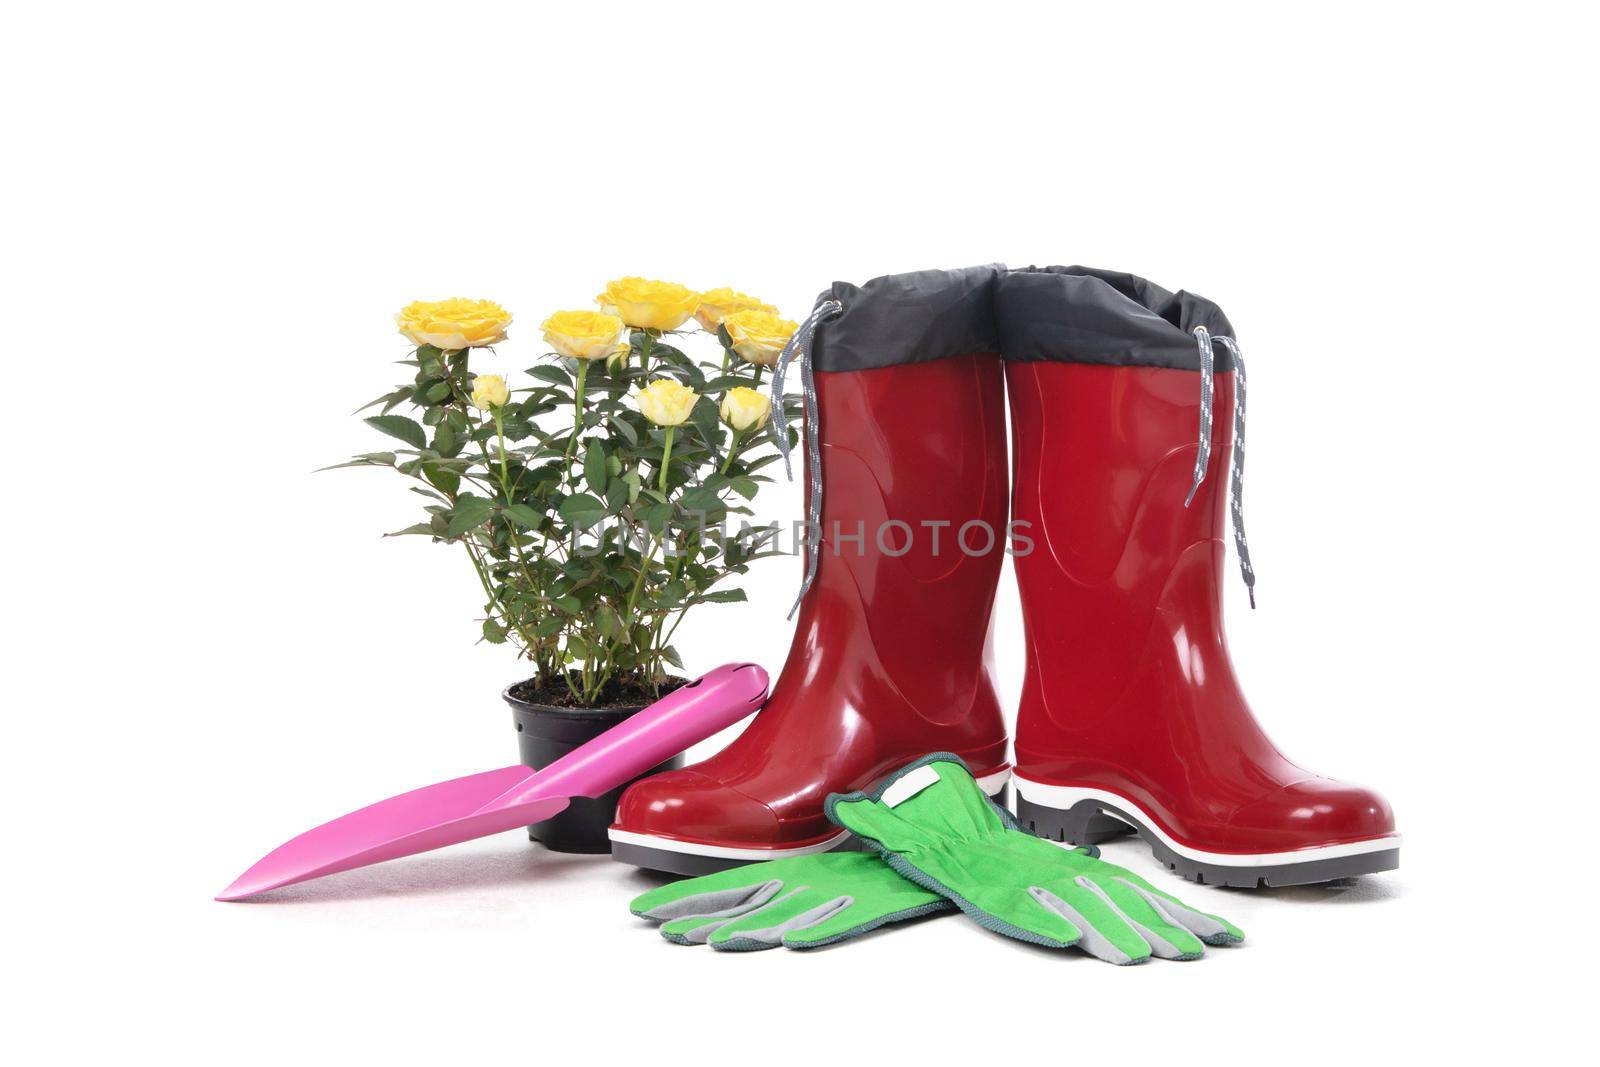 Garden tools with flower pot by ALotOfPeople